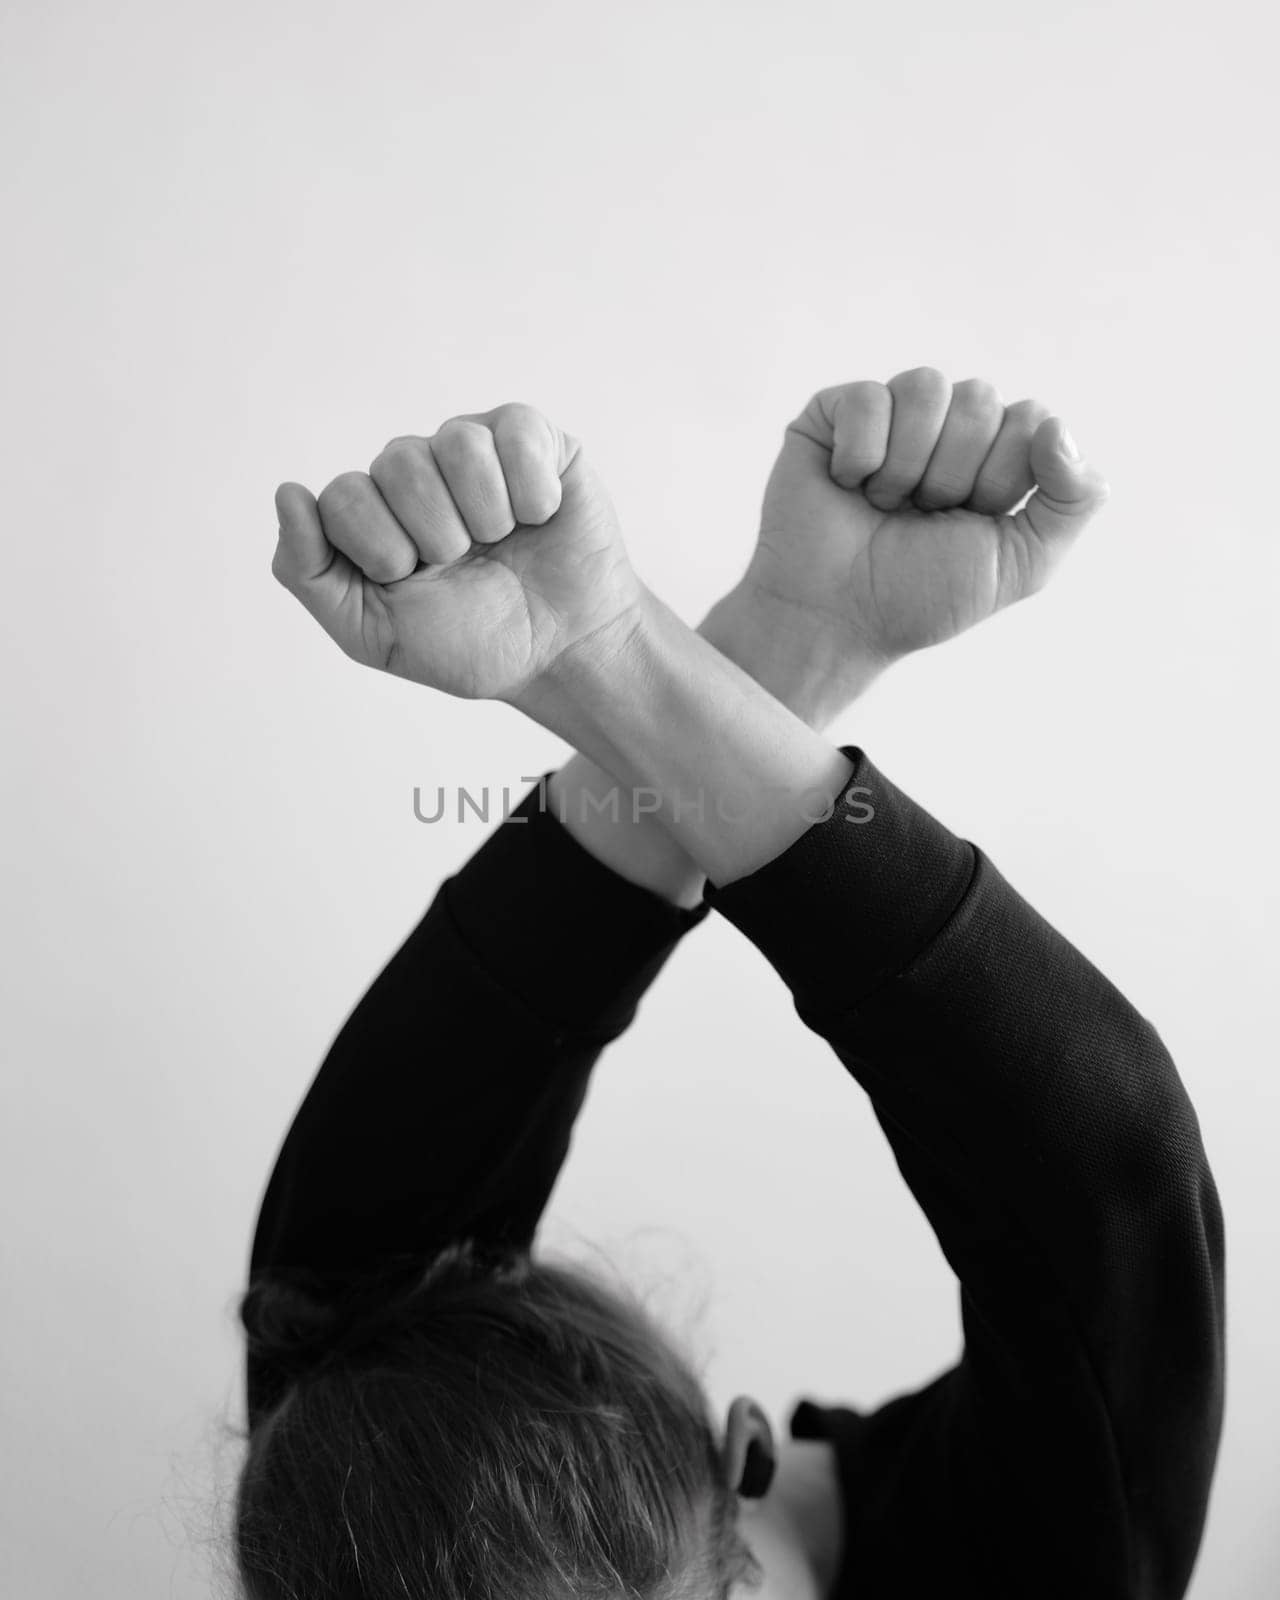 A person holding crossed hands above the head. X symbol using the hands in black and white by apavlin